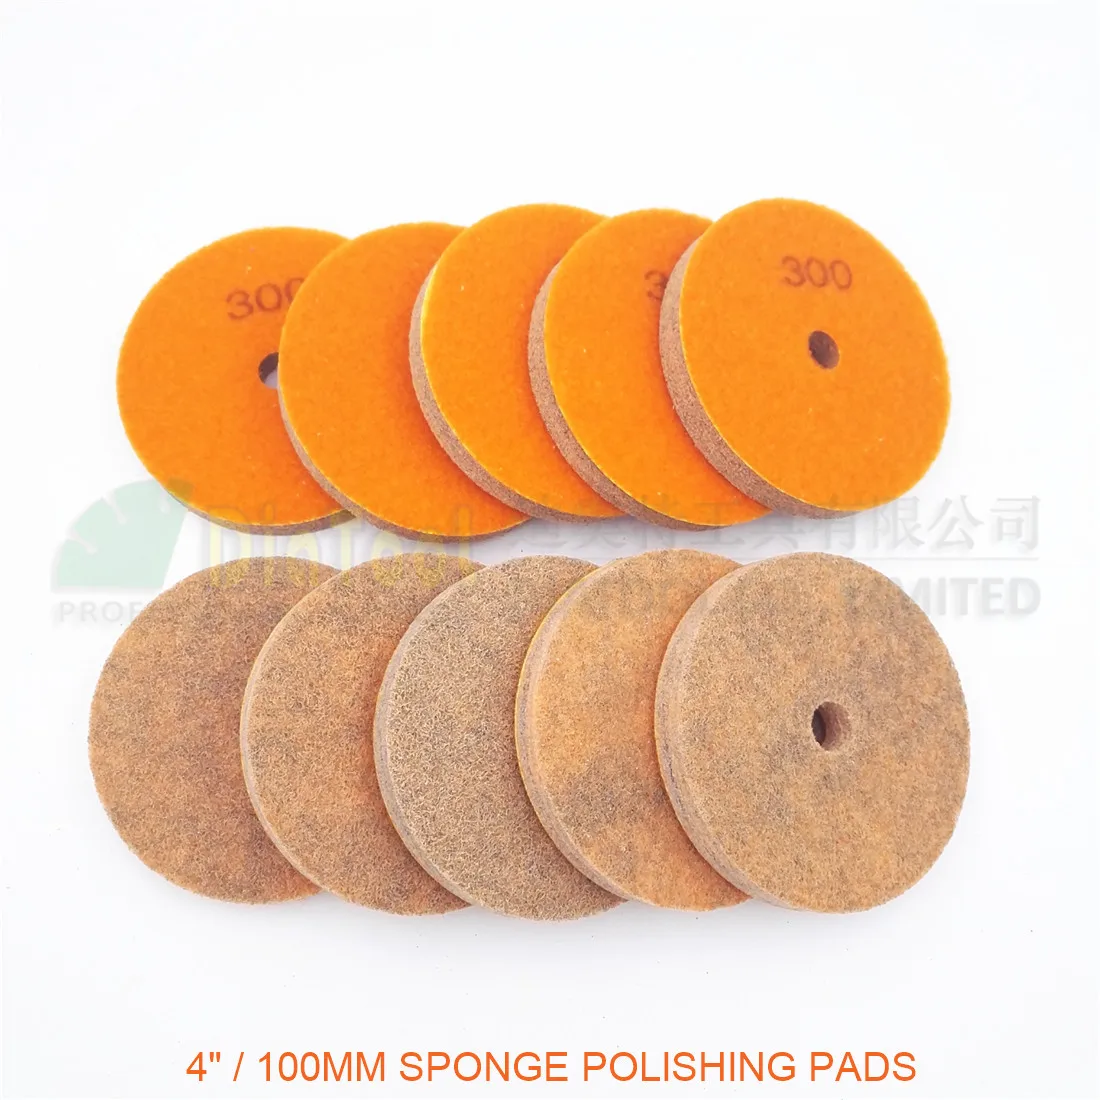 DIATOOL 10pcs 4inches Diamond Sponge Polishing Pads For Soft Stone Marble Artificial Stone Terrazzo Grit #300 Diameter 100MM dt diatool 1pc m14 thread laser welded dry diamond hole saw dry drilling core bits for drilling hard granite marble stone